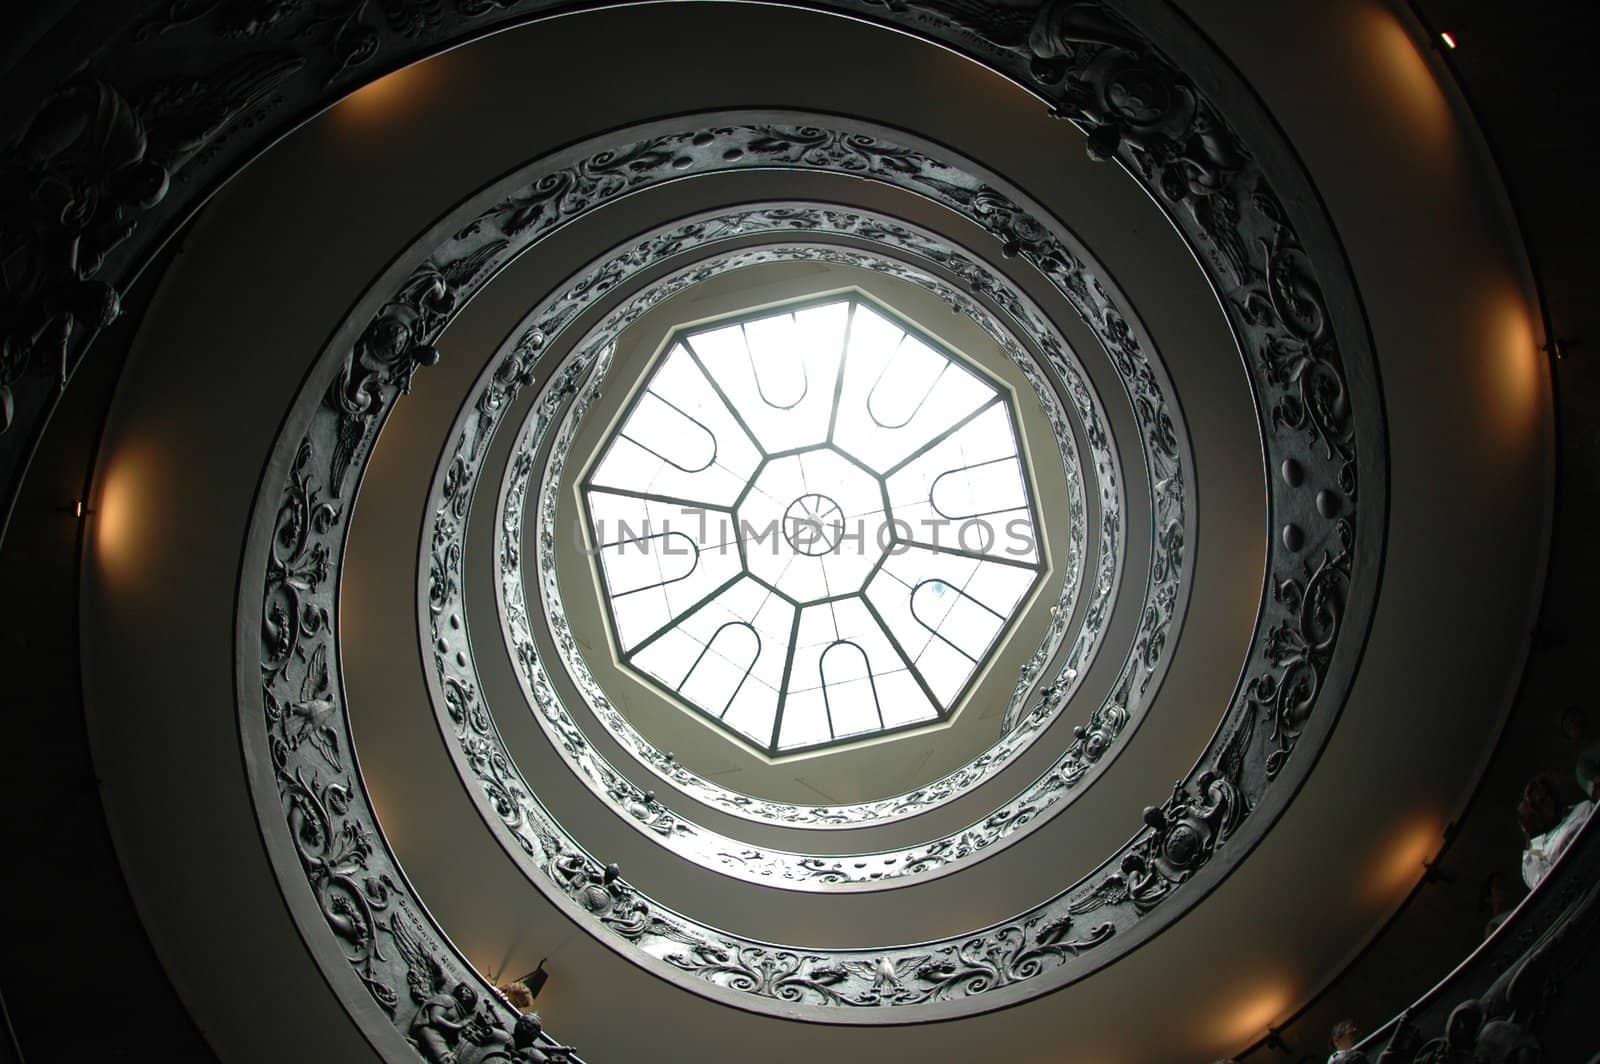 Spiral staircase in the Vatican museums, Italy